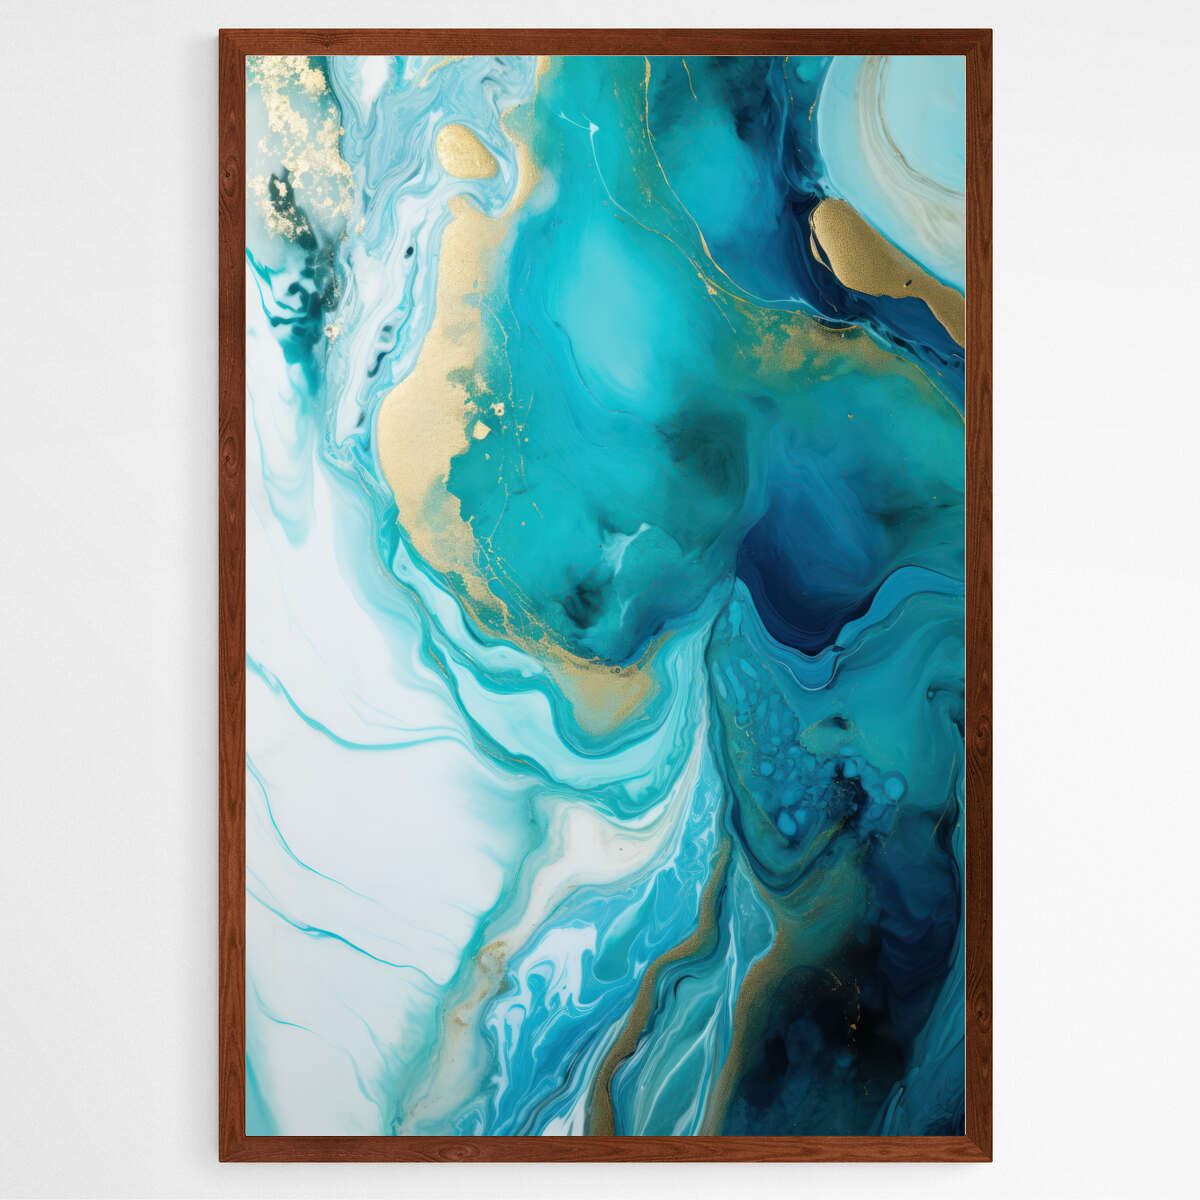 Azure Allure | Abstract Wall Art Prints - The Canvas Hive